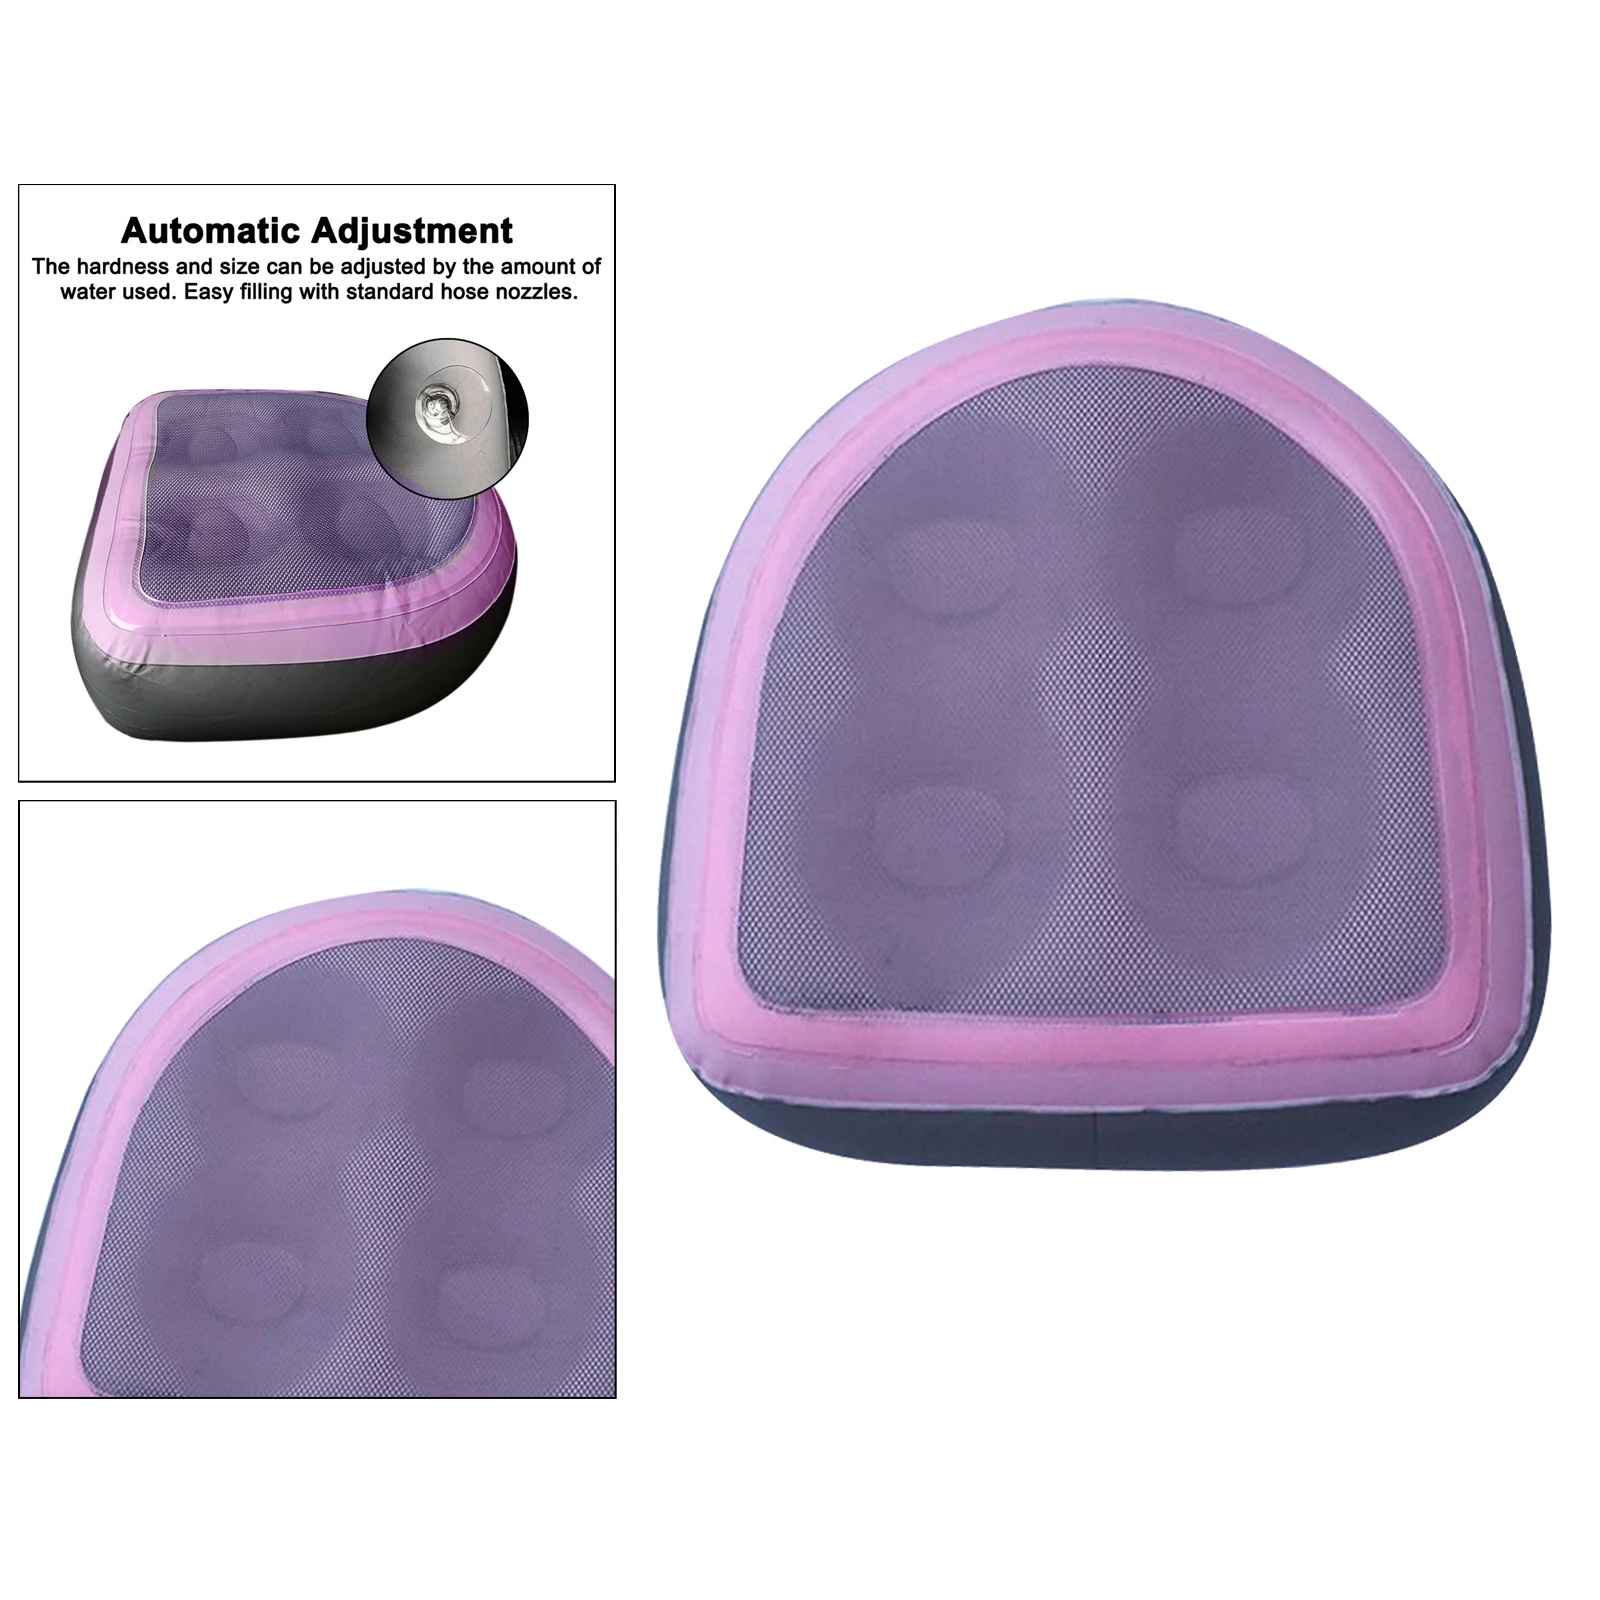 Spa and Hot Tub Booster Seat Inflatable Bathtub Massage Cushion Relaxation Mat with Suction Cups Back Support Pad bee cushion